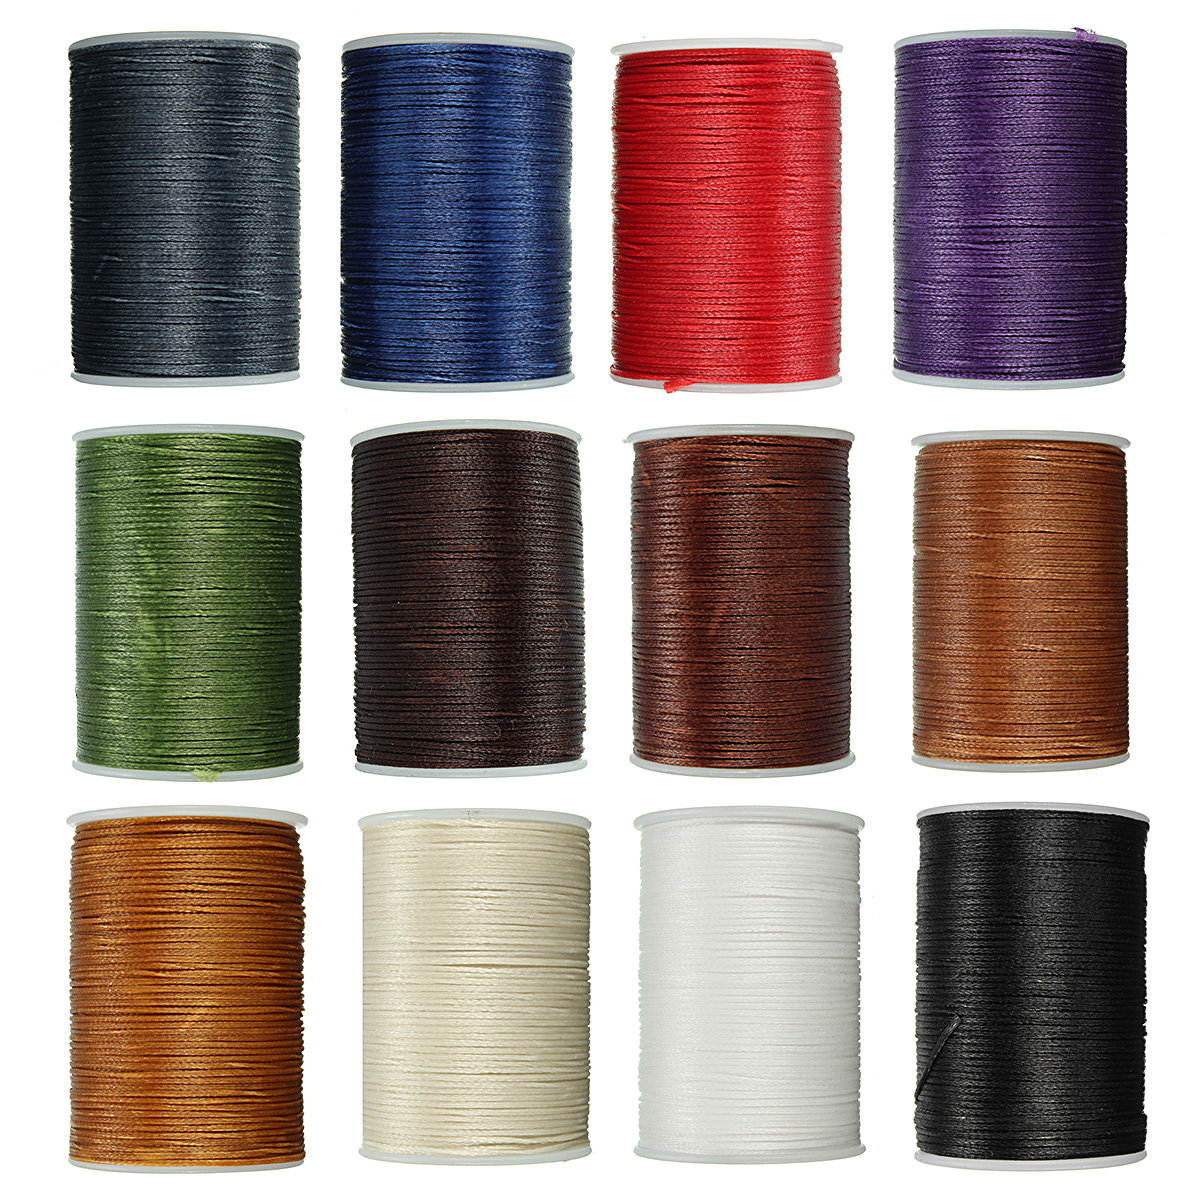 

78m Waxed Thread Polyester Cord Sewing Stitching Leather Craft Bracelet, Navy blue red purple green dark brown brown coffee brown/yellow white white black